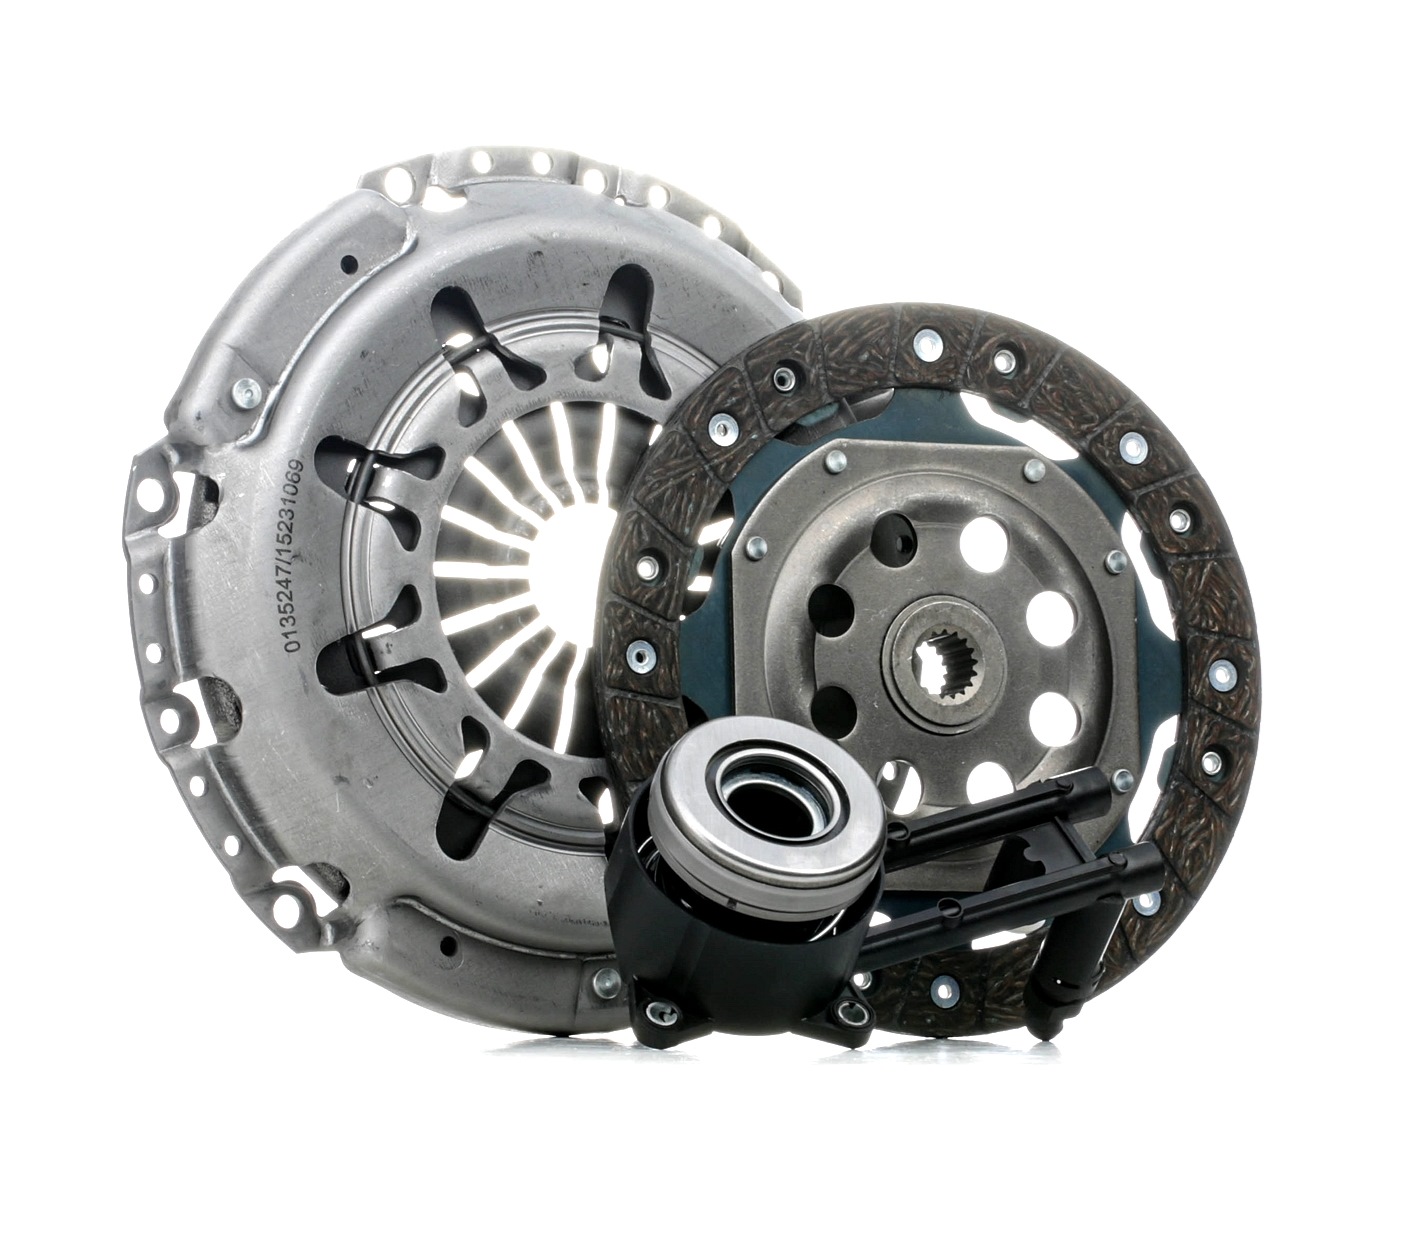 STARK SKCK-0100548 Clutch kit with clutch pressure plate, with central slave cylinder, with clutch disc, 210mm